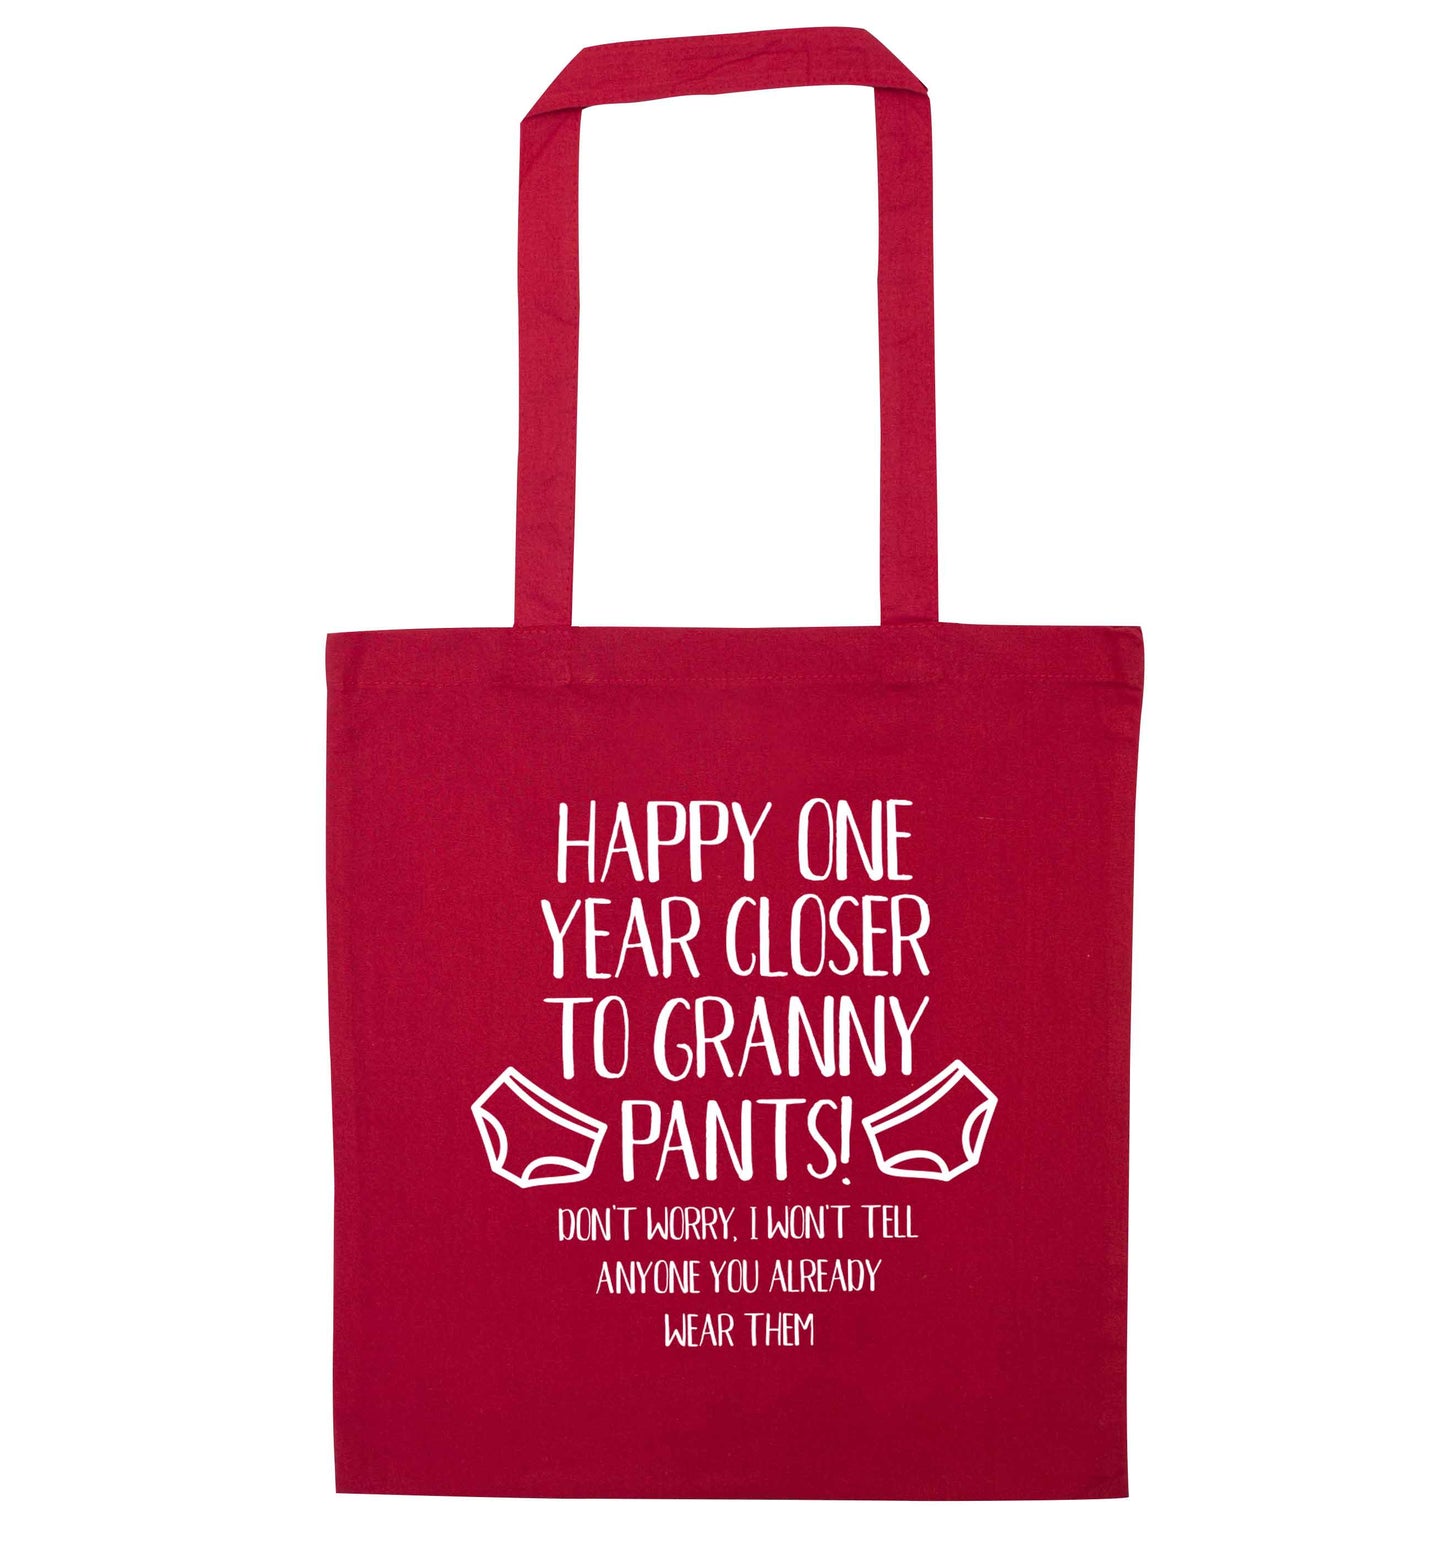 Happy one year closer to granny pants red tote bag